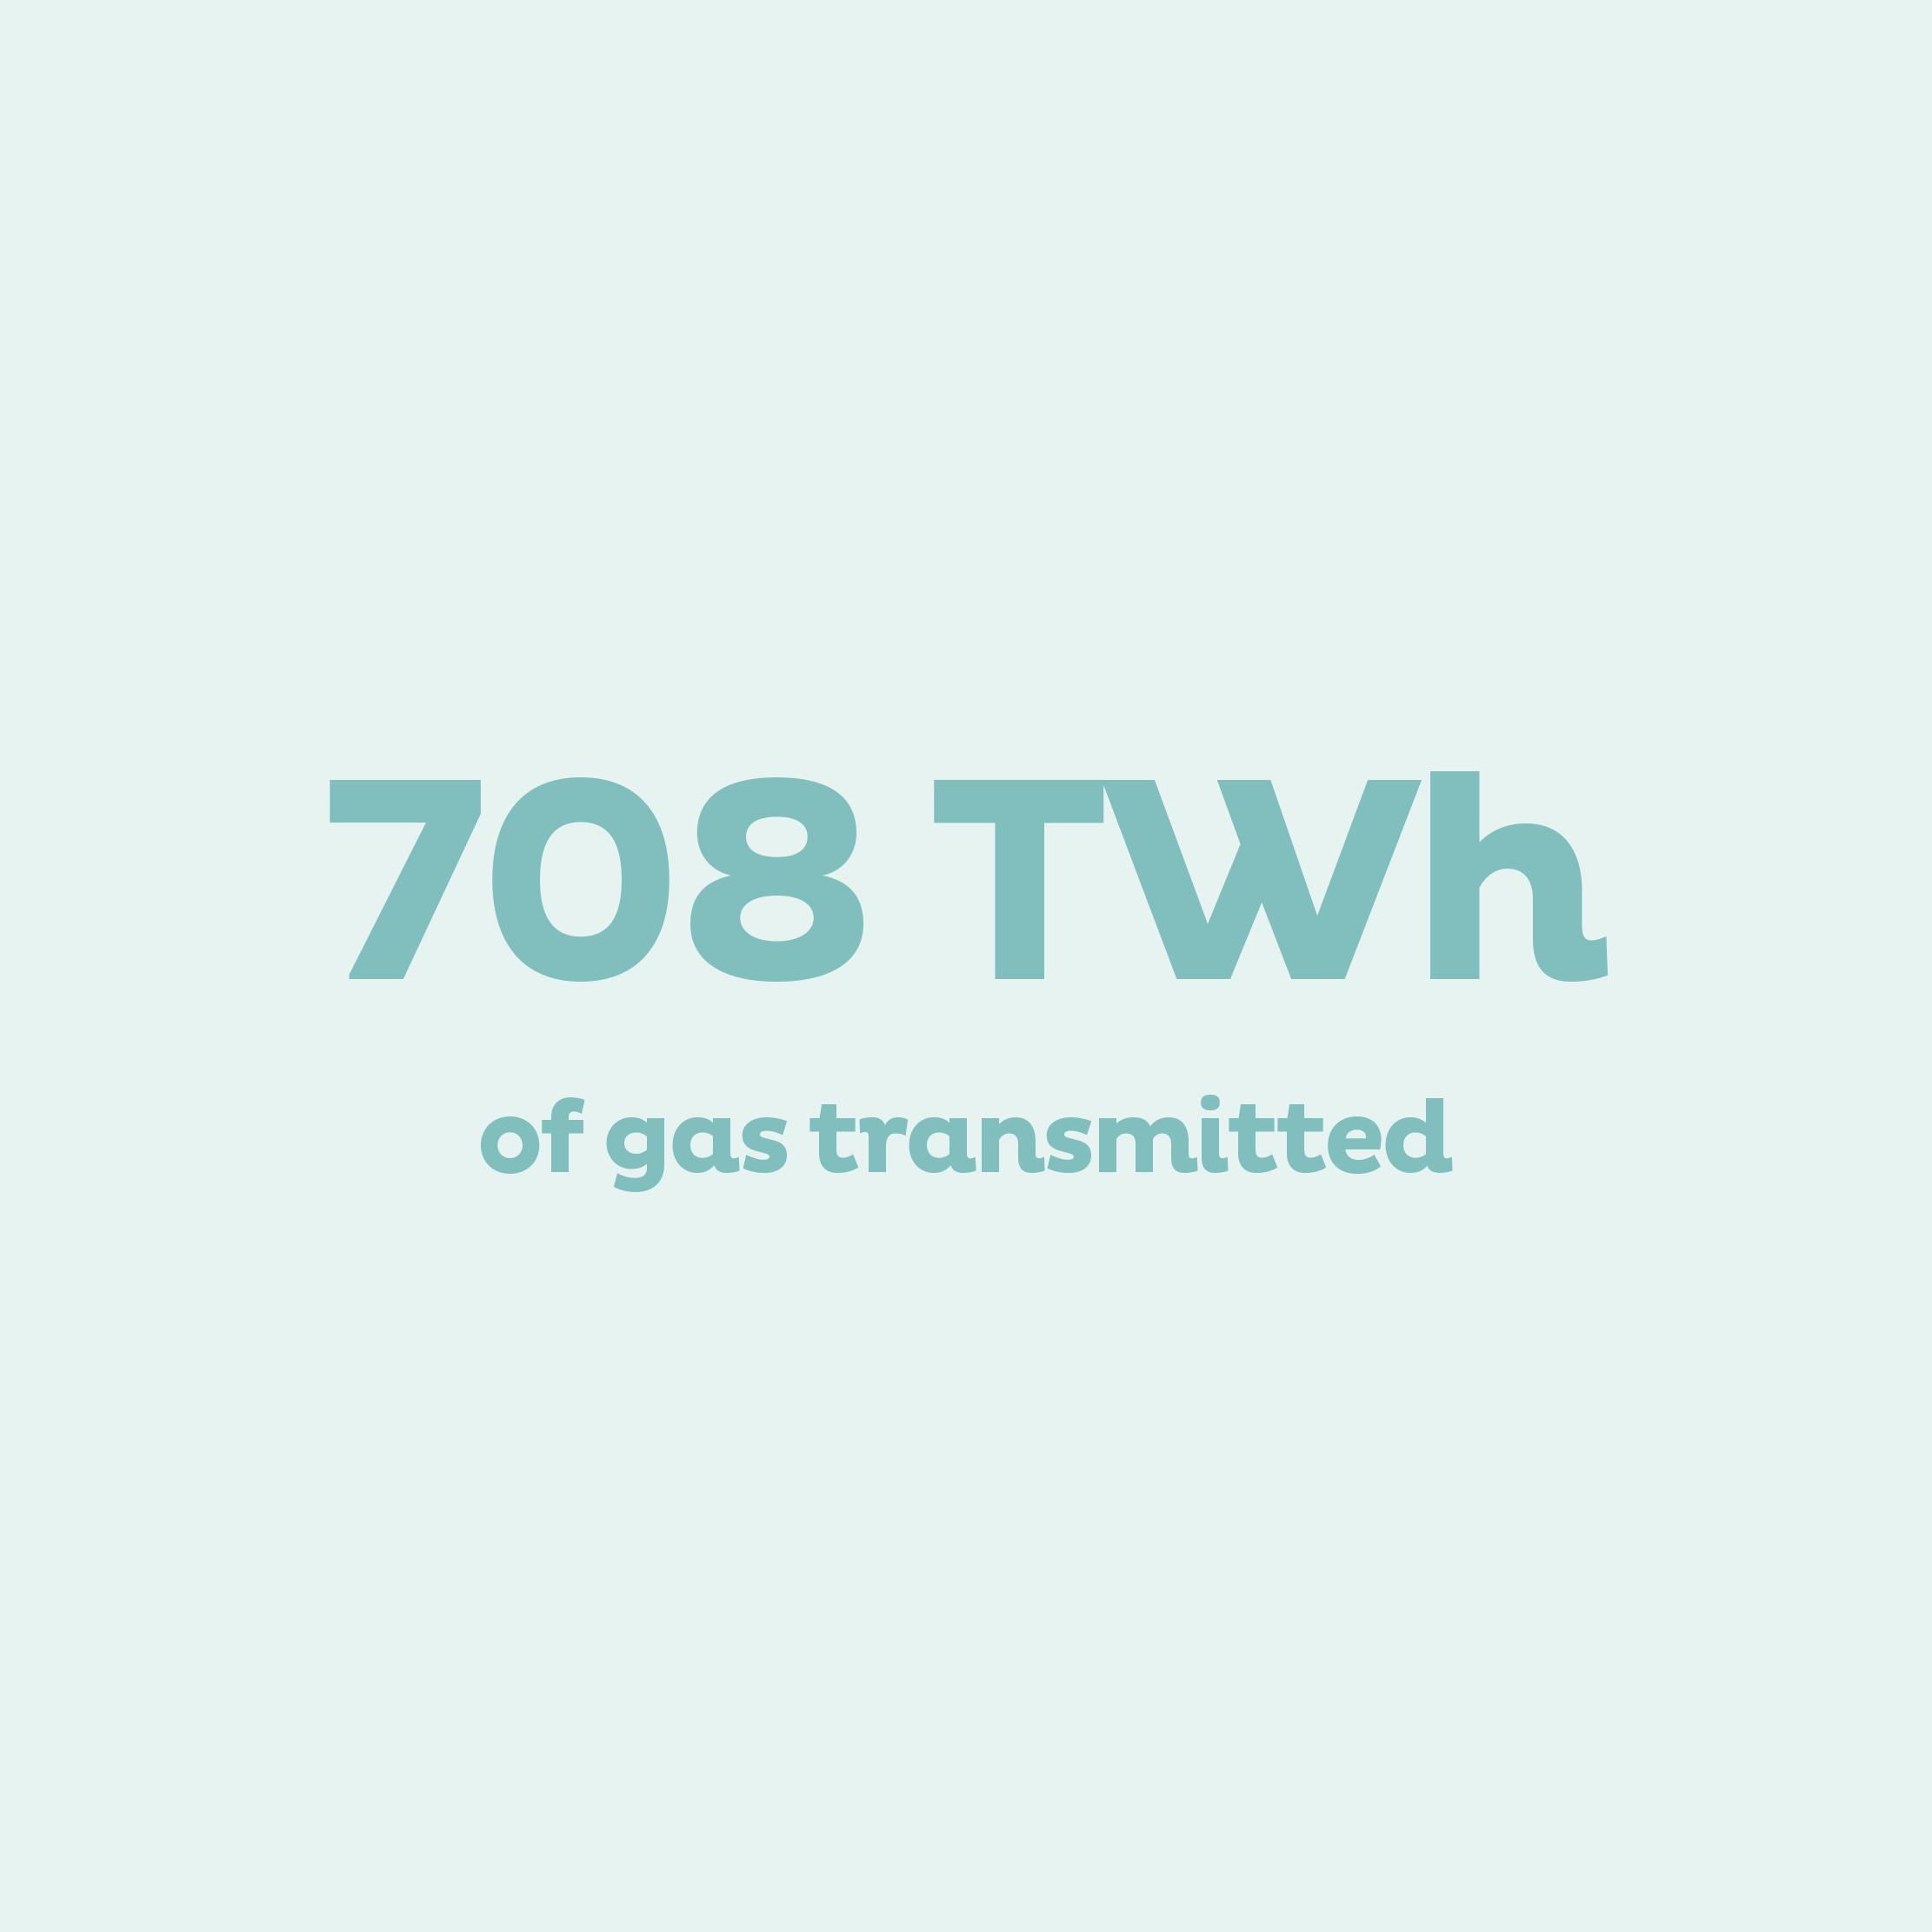 708.4 TWh of gas transmitted